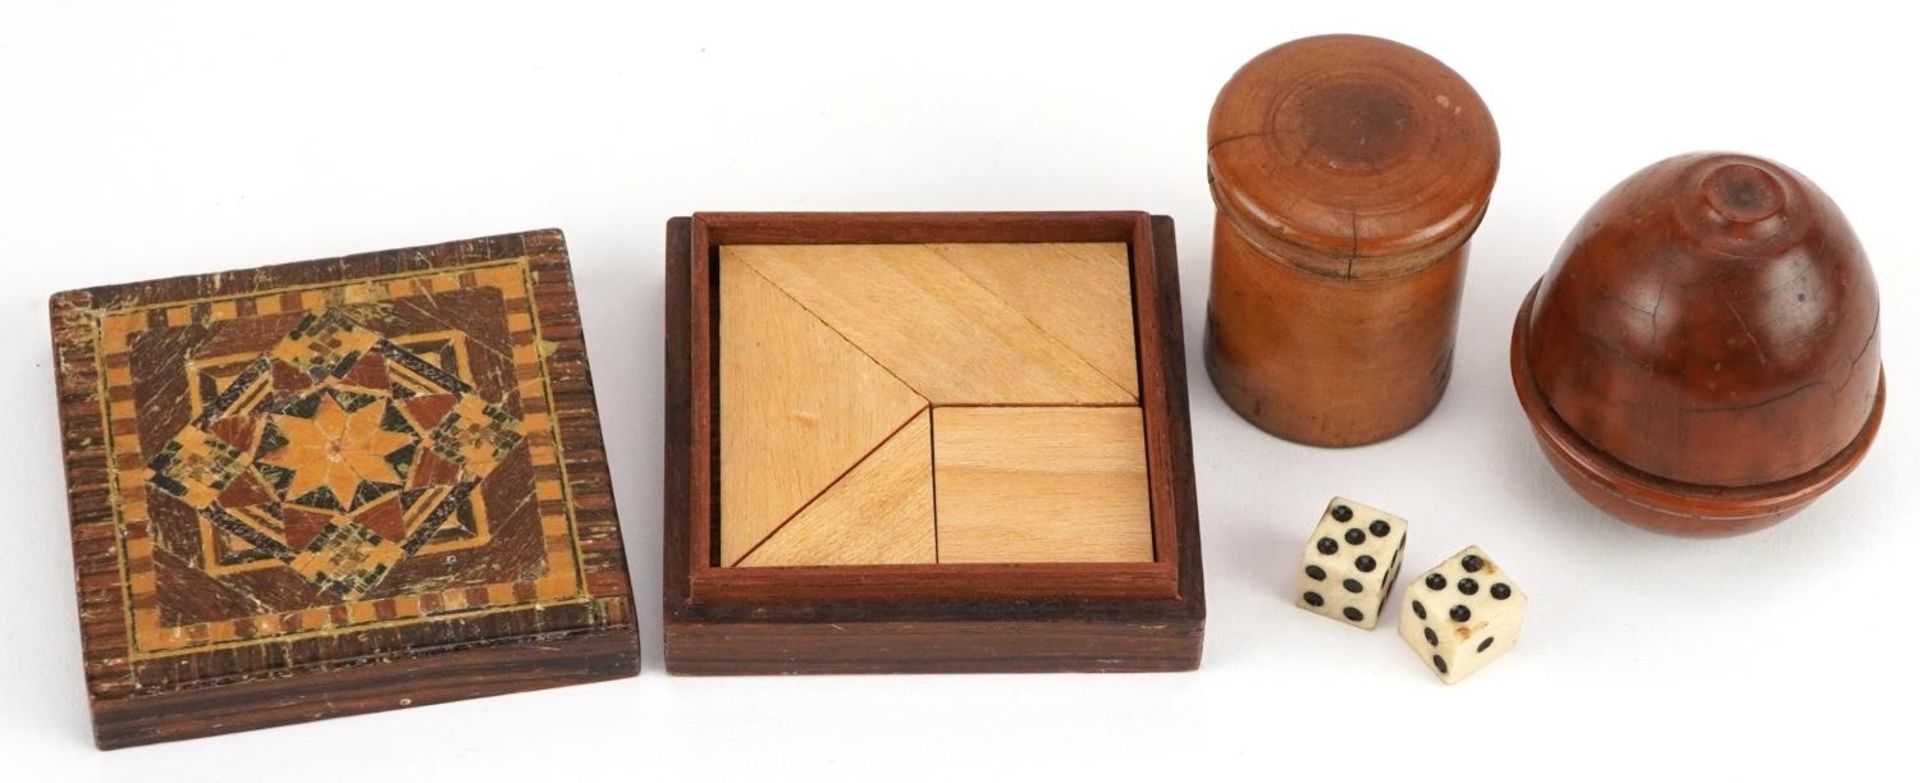 19th century treen including a square Tunbridge Ware puzzle box with tangram pieces, the largest 5.